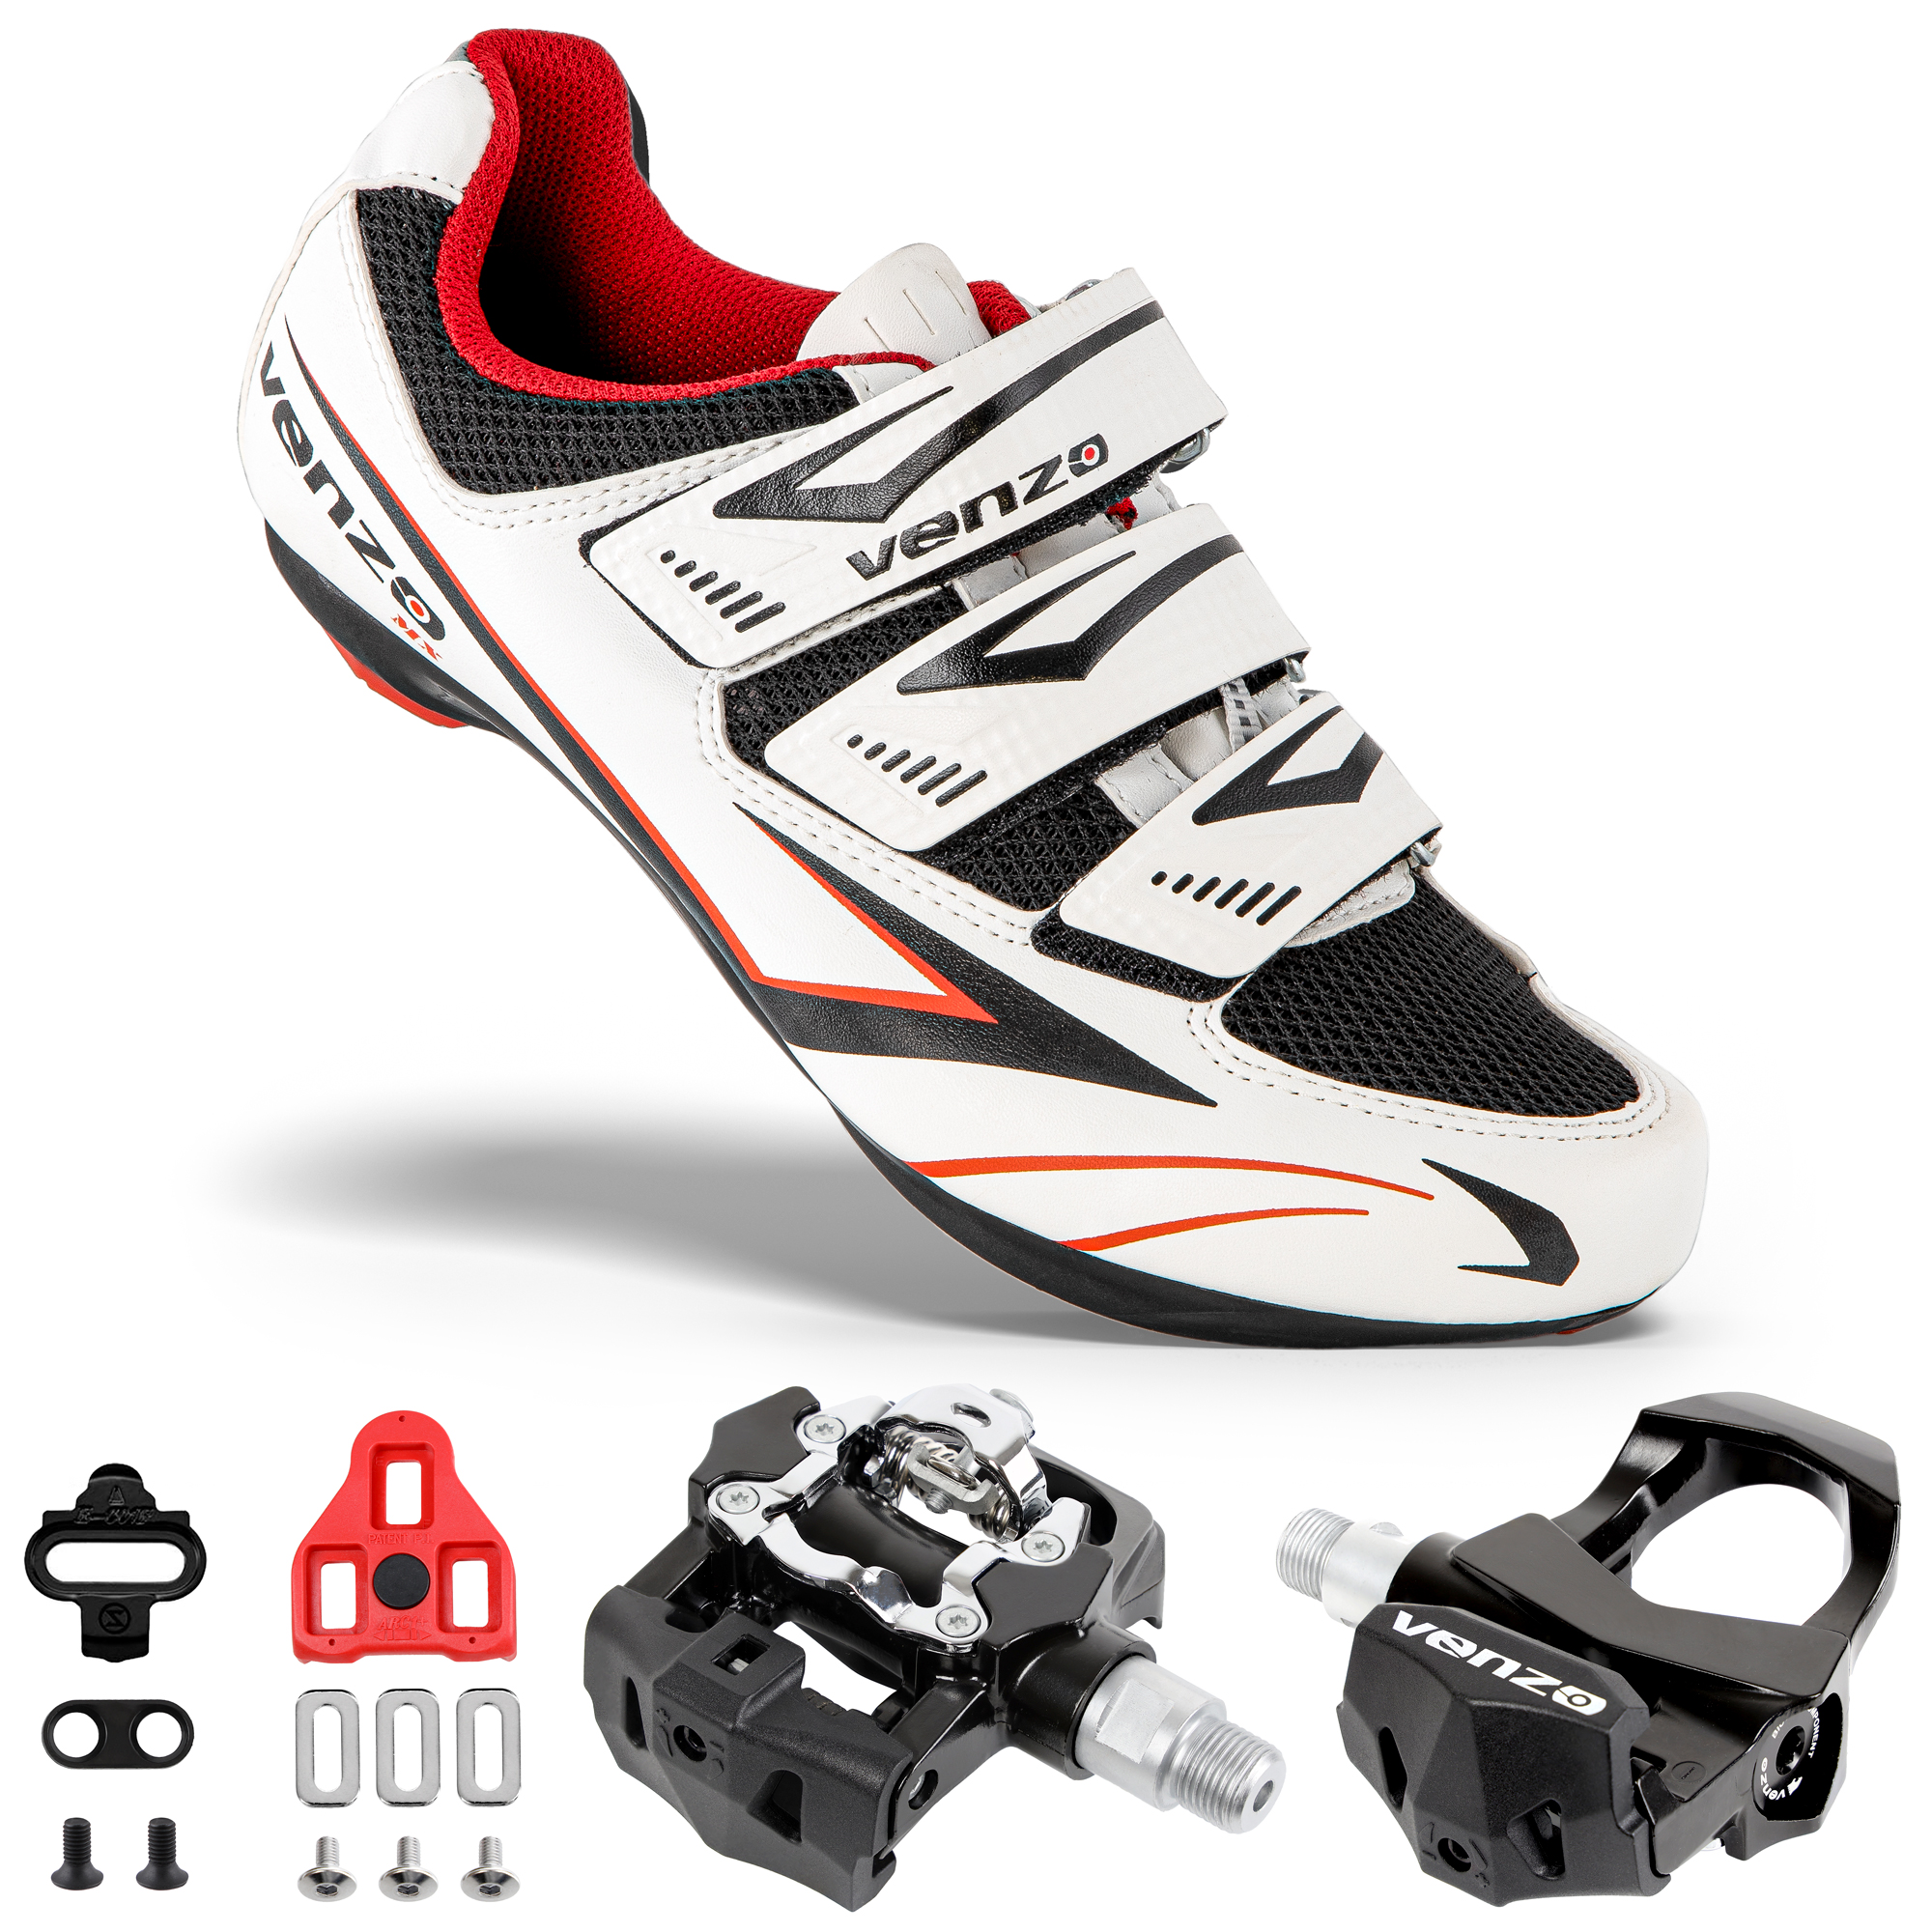 Shoes with Look Delta Spin Cleats 